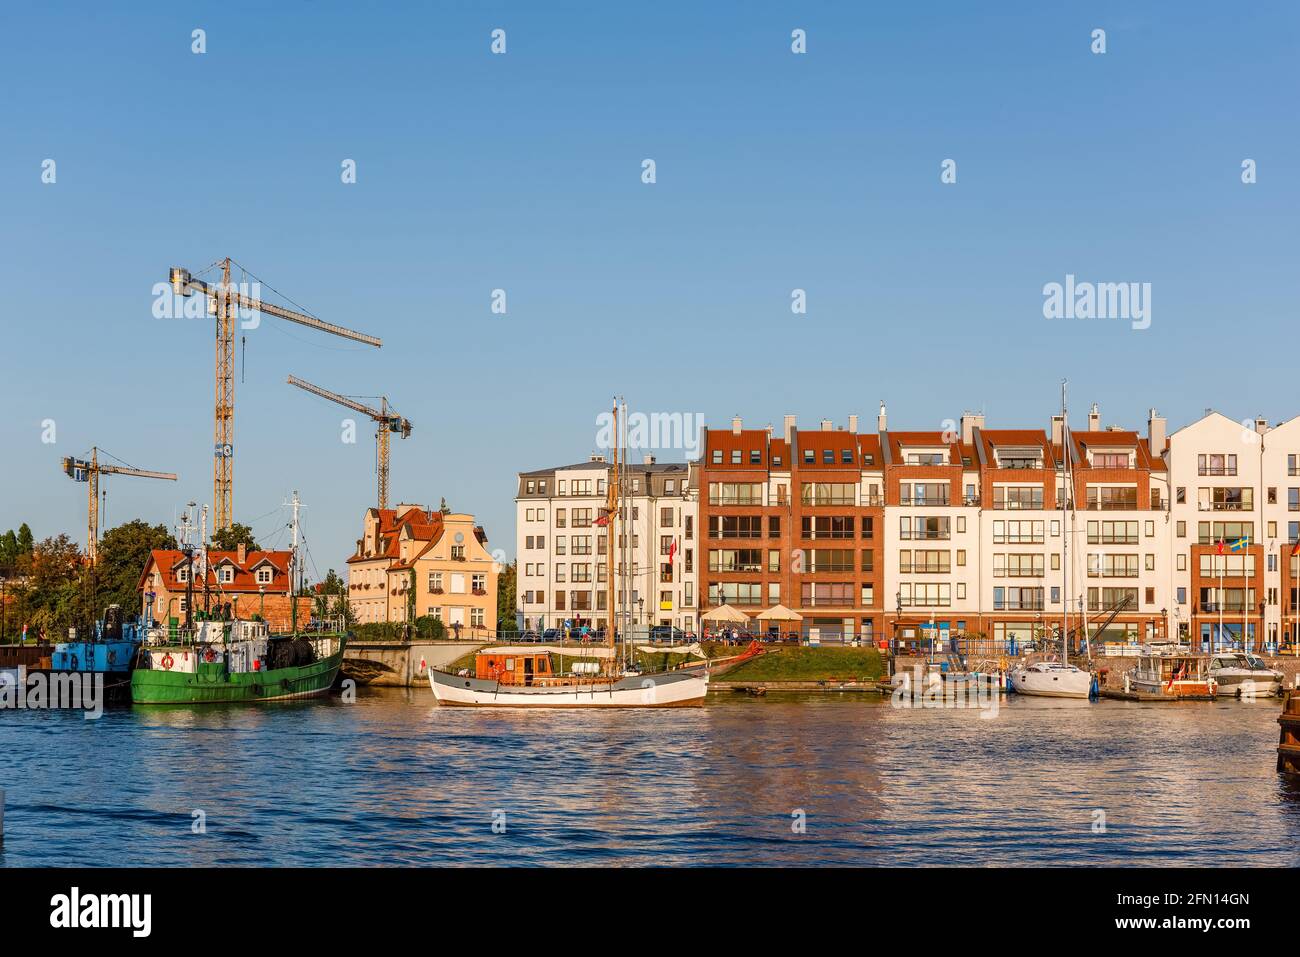 new residential and apartment buildings build in a harbour in an urban environment Stock Photo